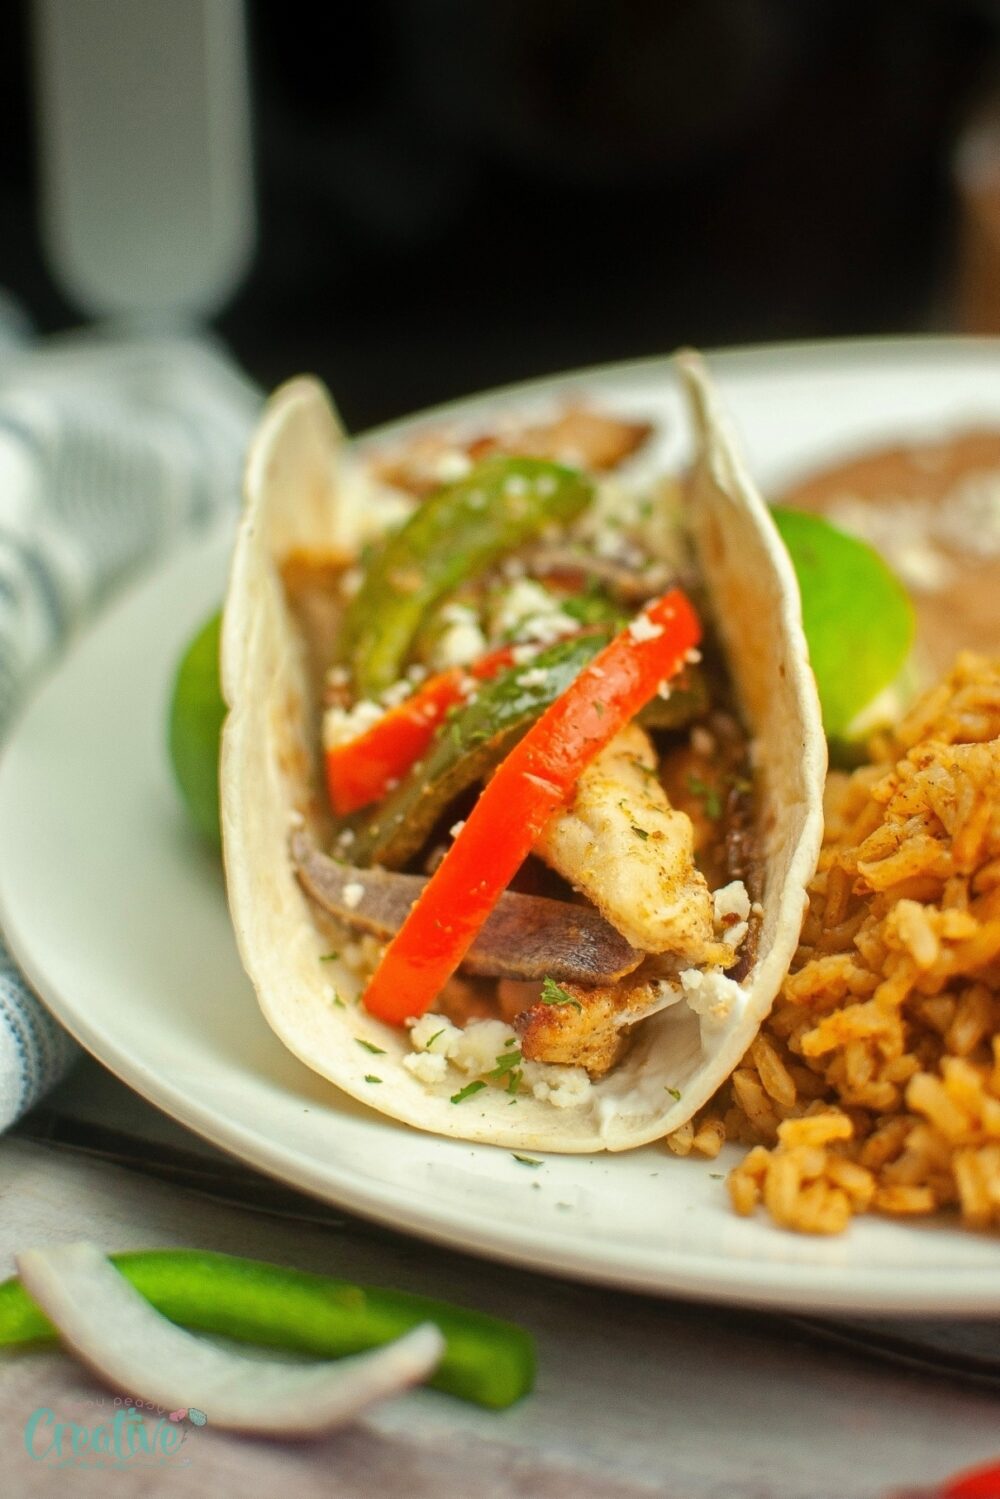 Prepare some irresistible chicken fajitas in the air fryer that will leave your taste buds watering. This simple yet tasty treat is ideal for those busy weeknights when you need a quick and satisfying meal.